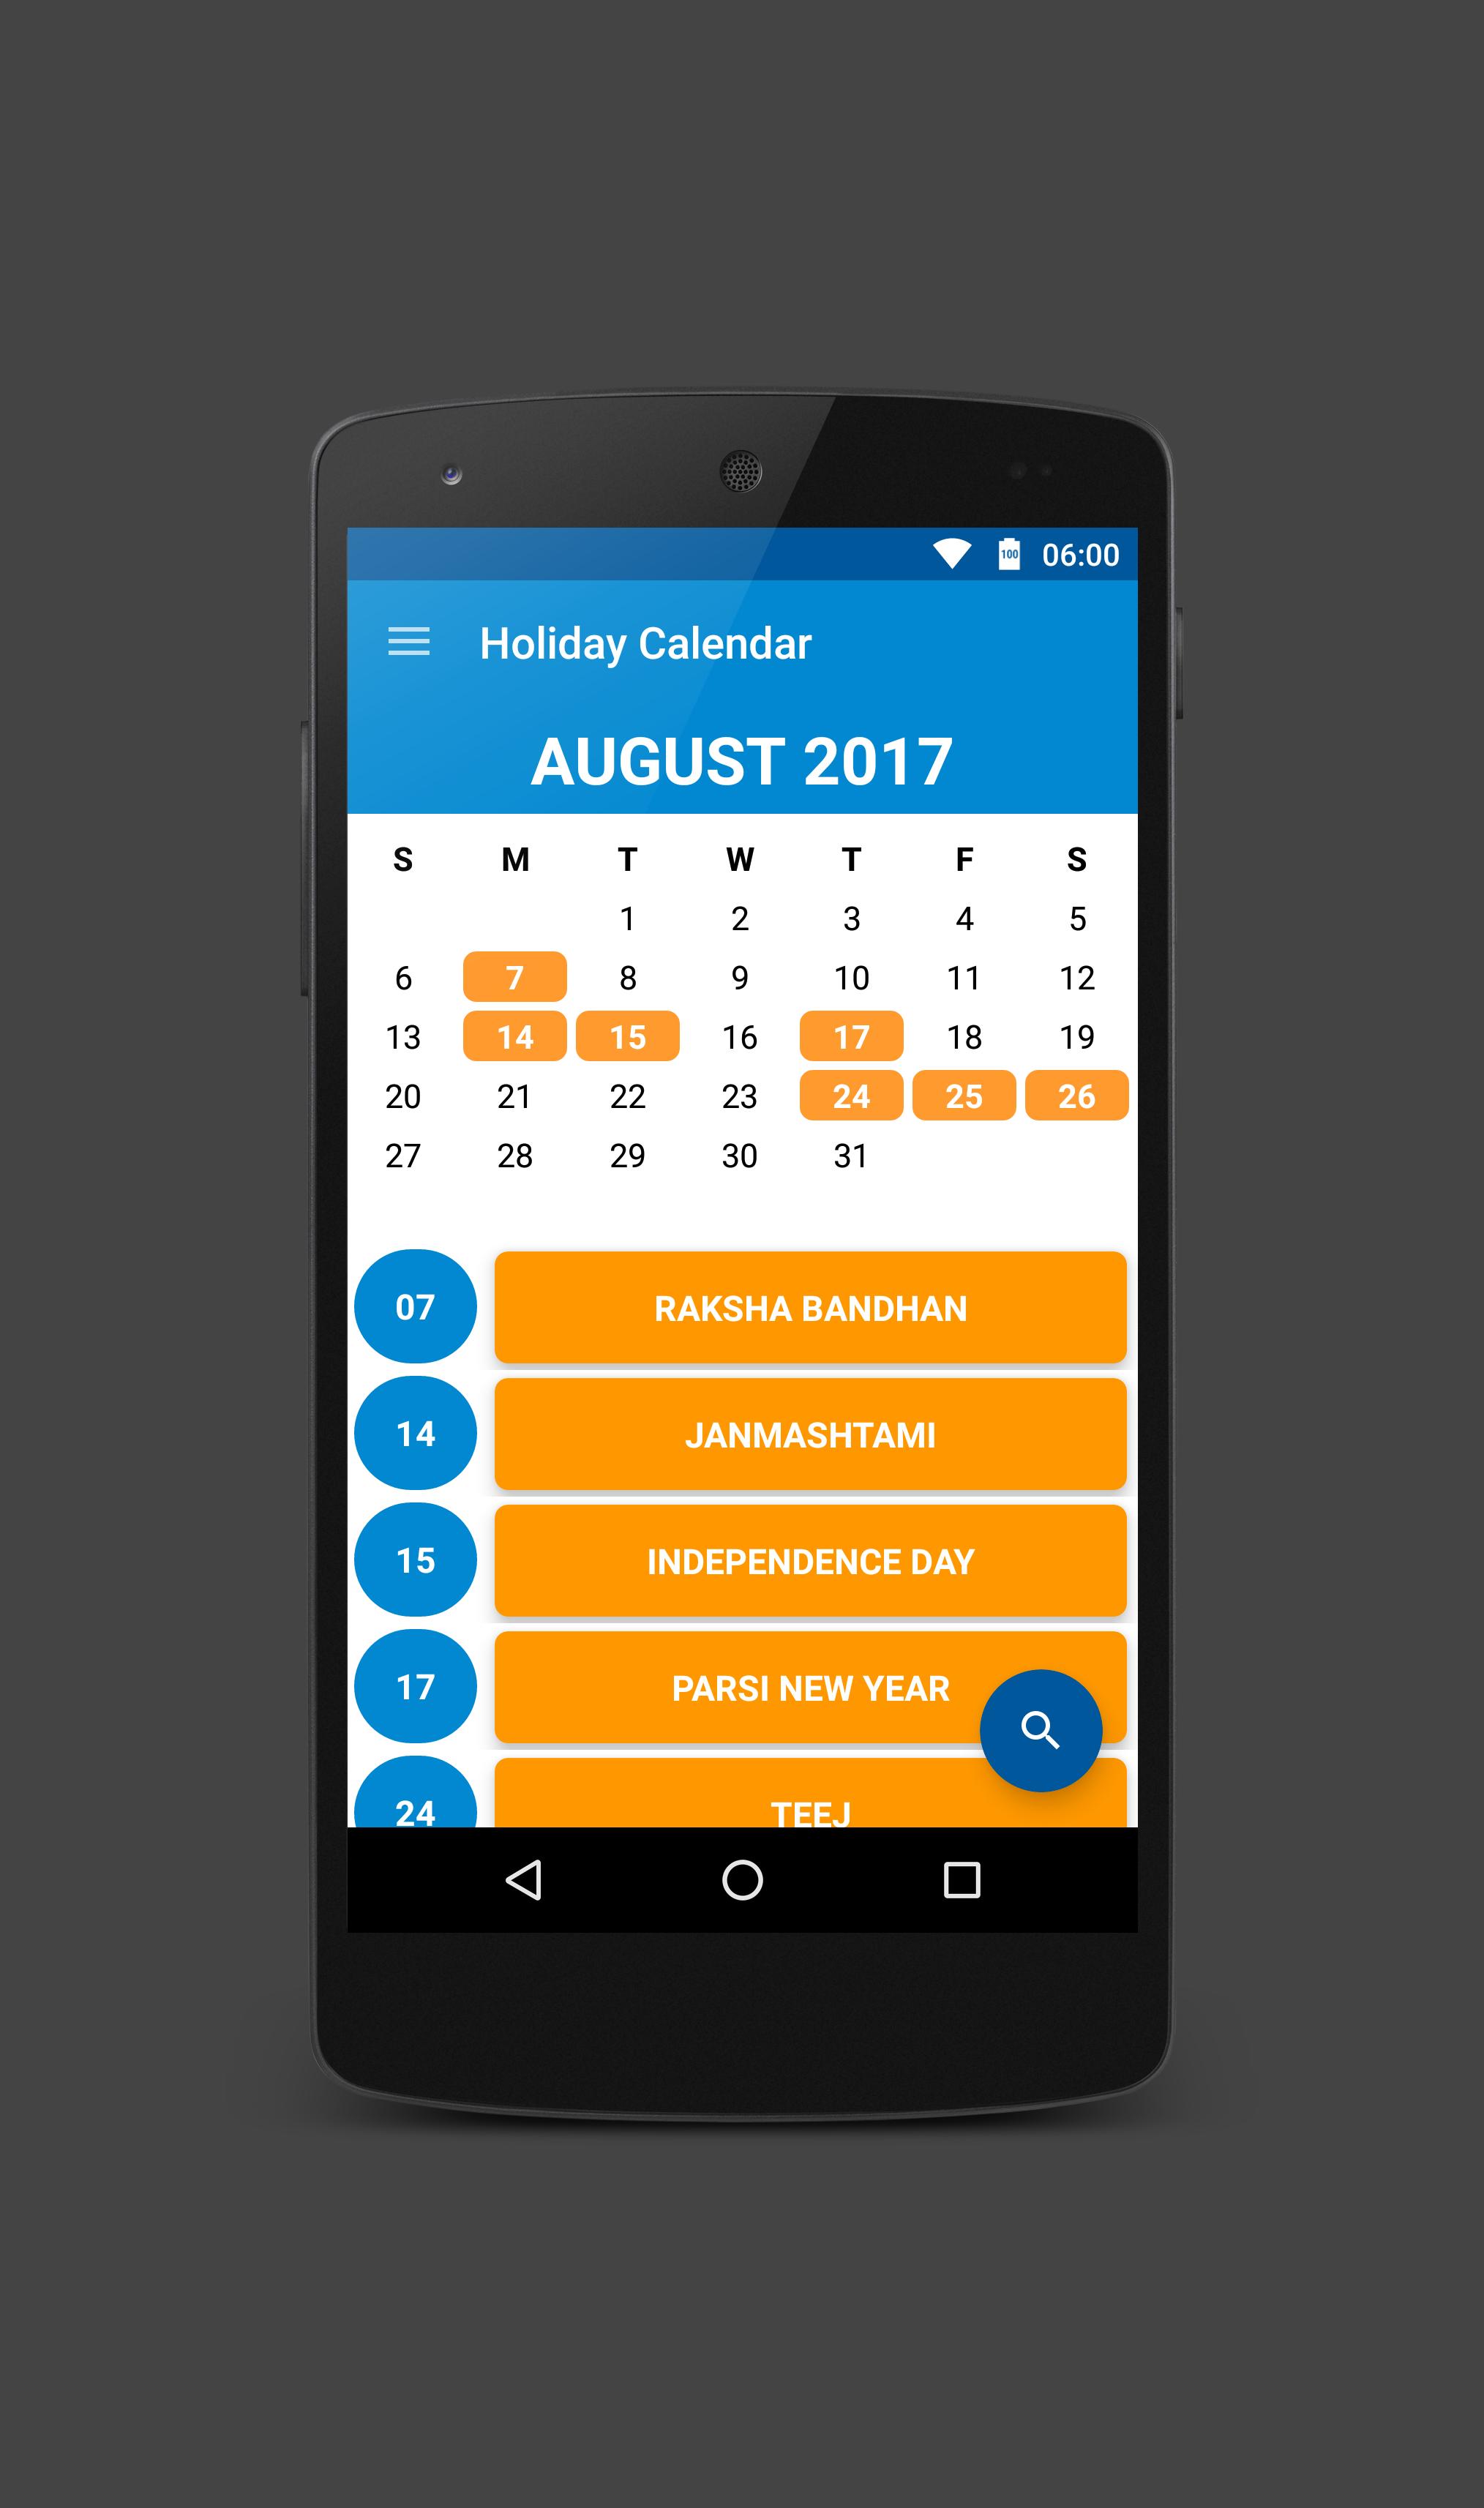 Holiday Calendar for Android - APK Download